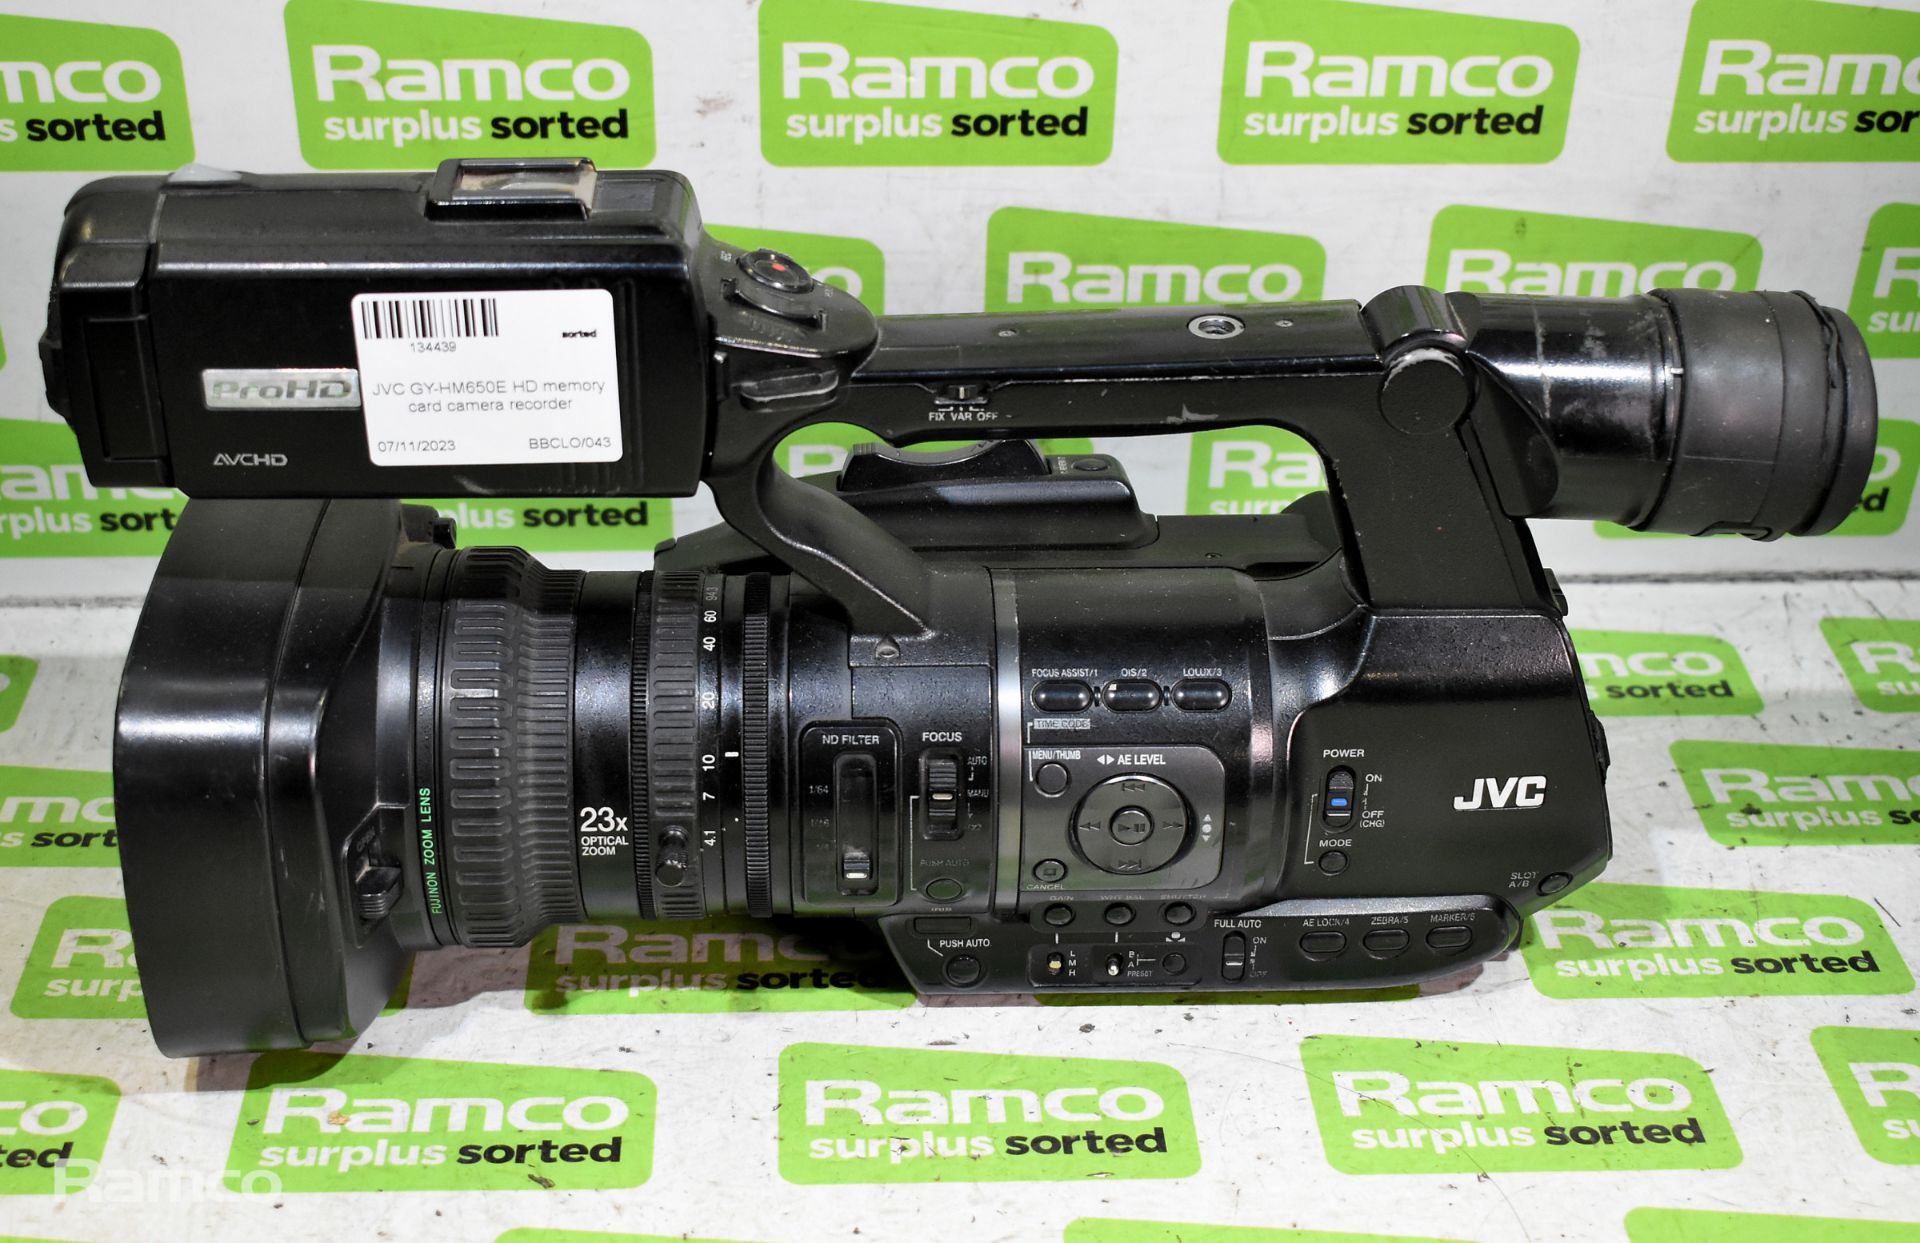 JVC GY-HM650E HD memory card camera recorder, Sony PMW-500 HD-XDCAM camcorder body - SPARES/REPAIRS - Image 2 of 21